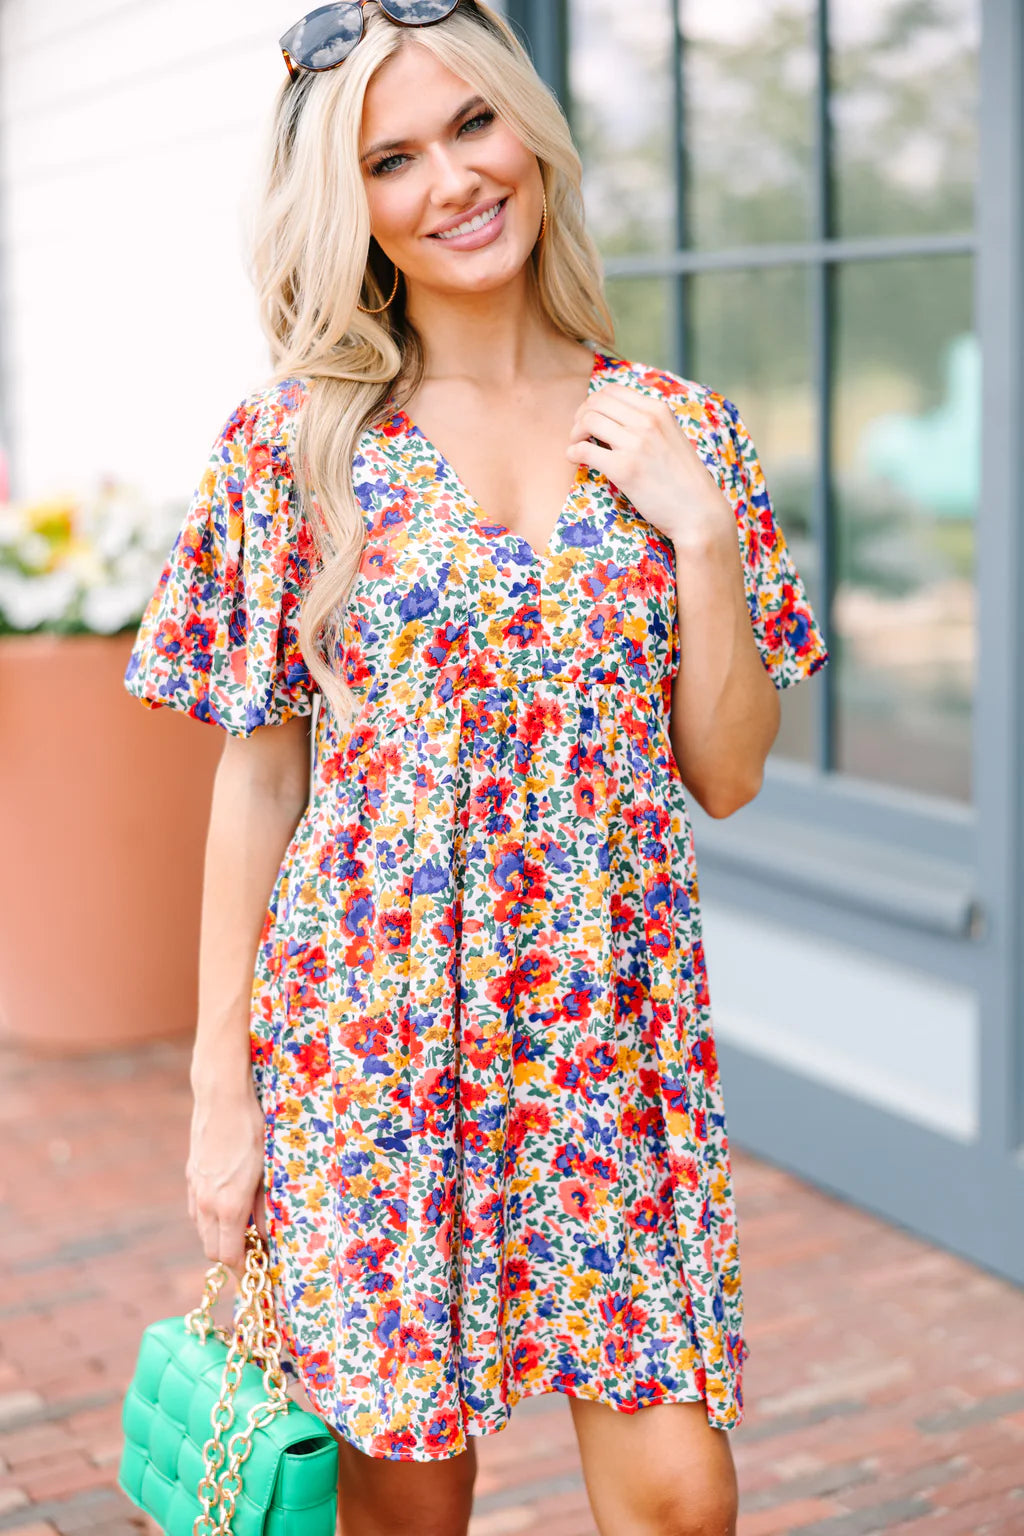 10 Trendy Summer Date Night Outfit Ideas: How to Dress for a Date